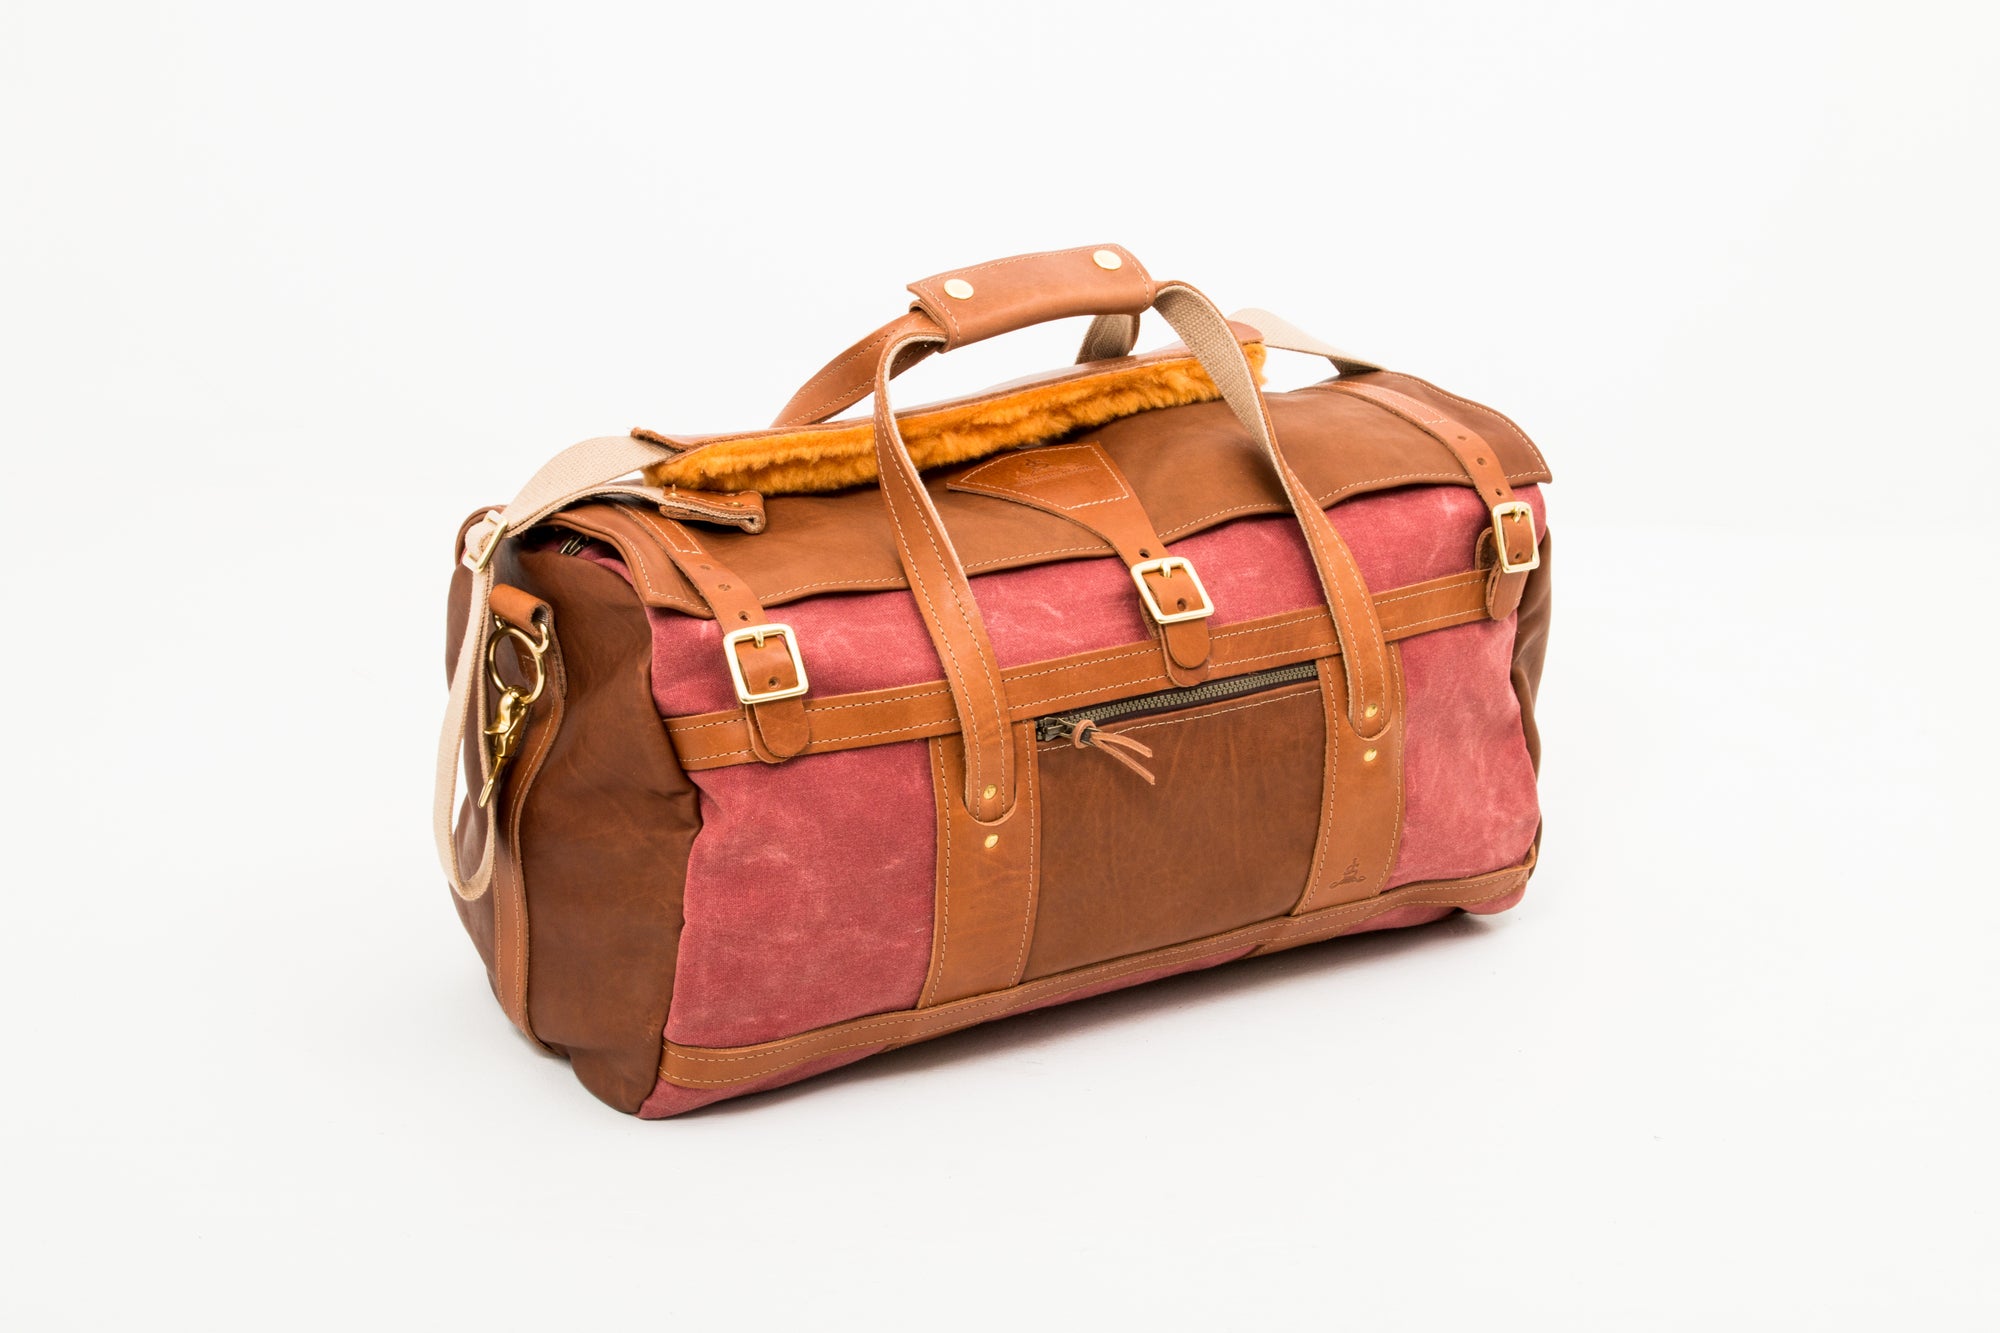 Nantucket Red Tour Style Duffel Bag with Leather Flap and Ends- Steurer & Jacoby